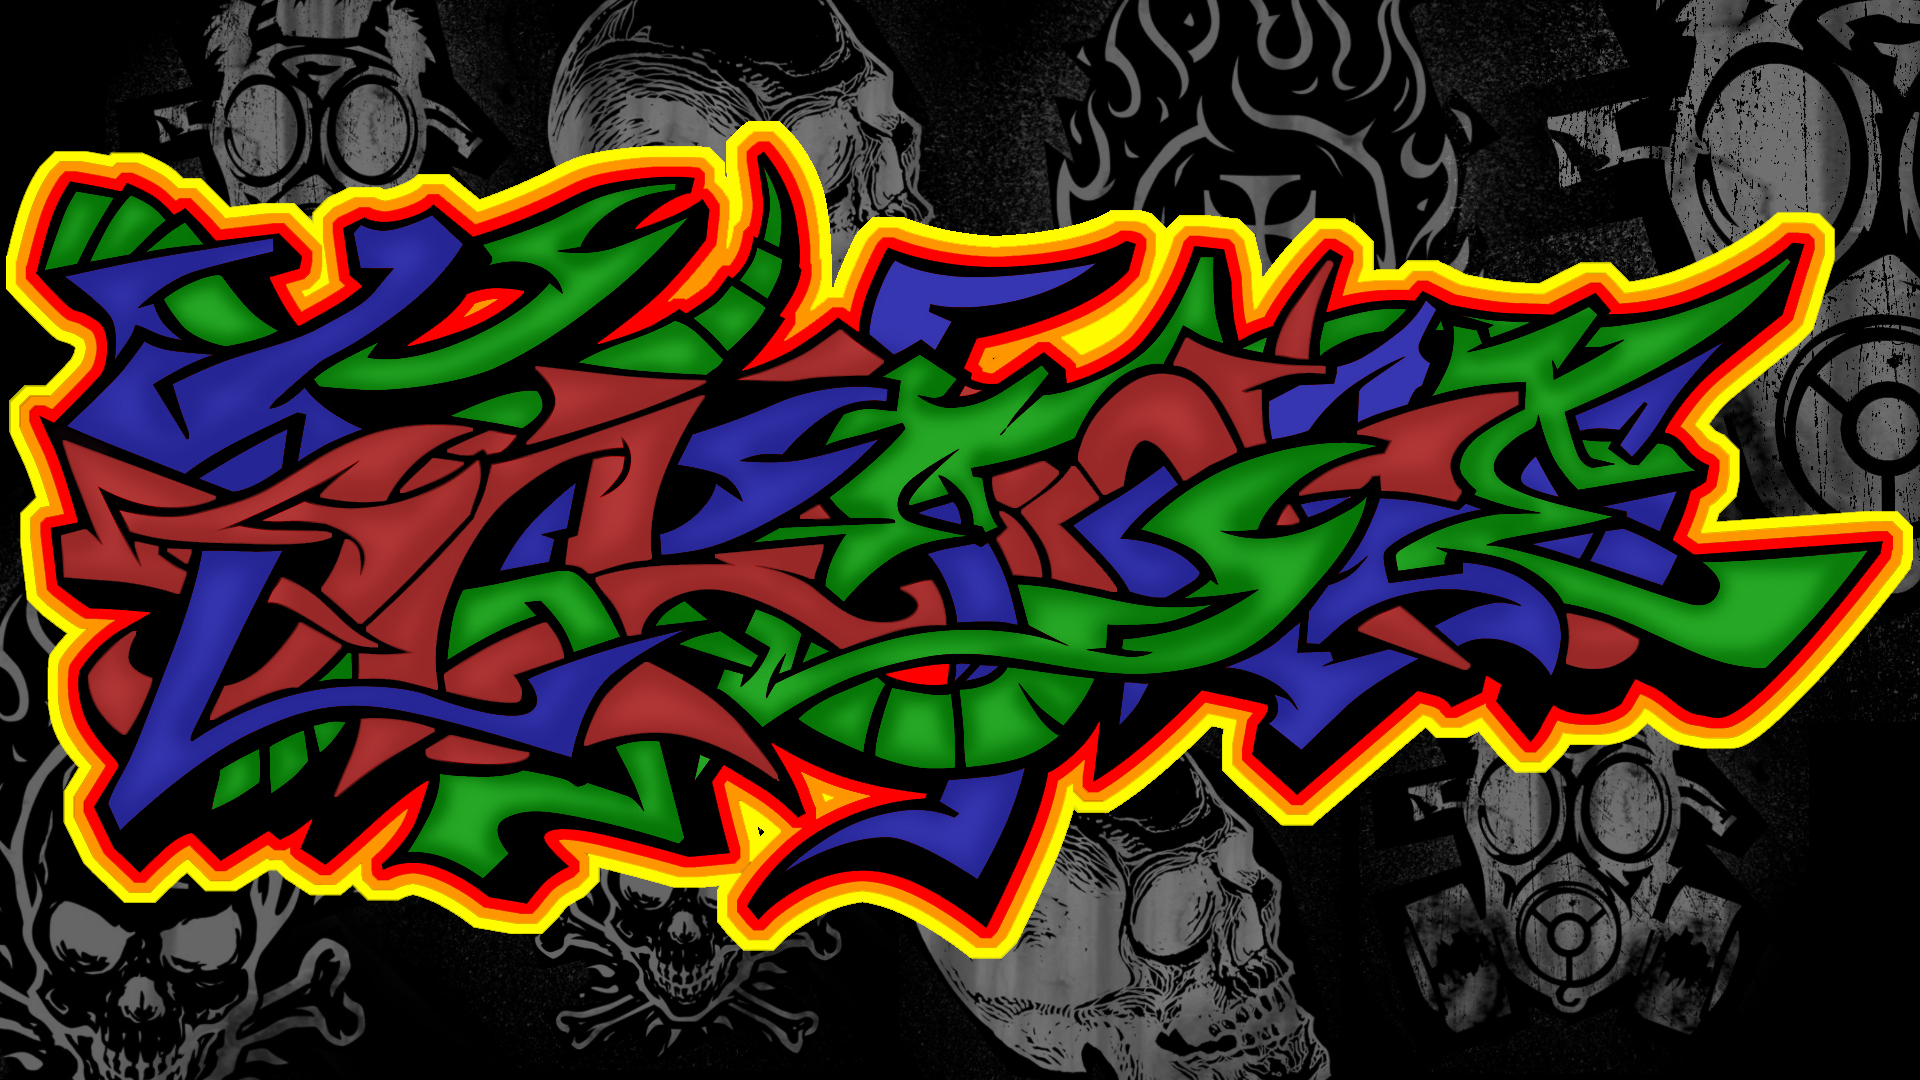 graffiti_wallpapers_1080p_hd_cool_awesome_design